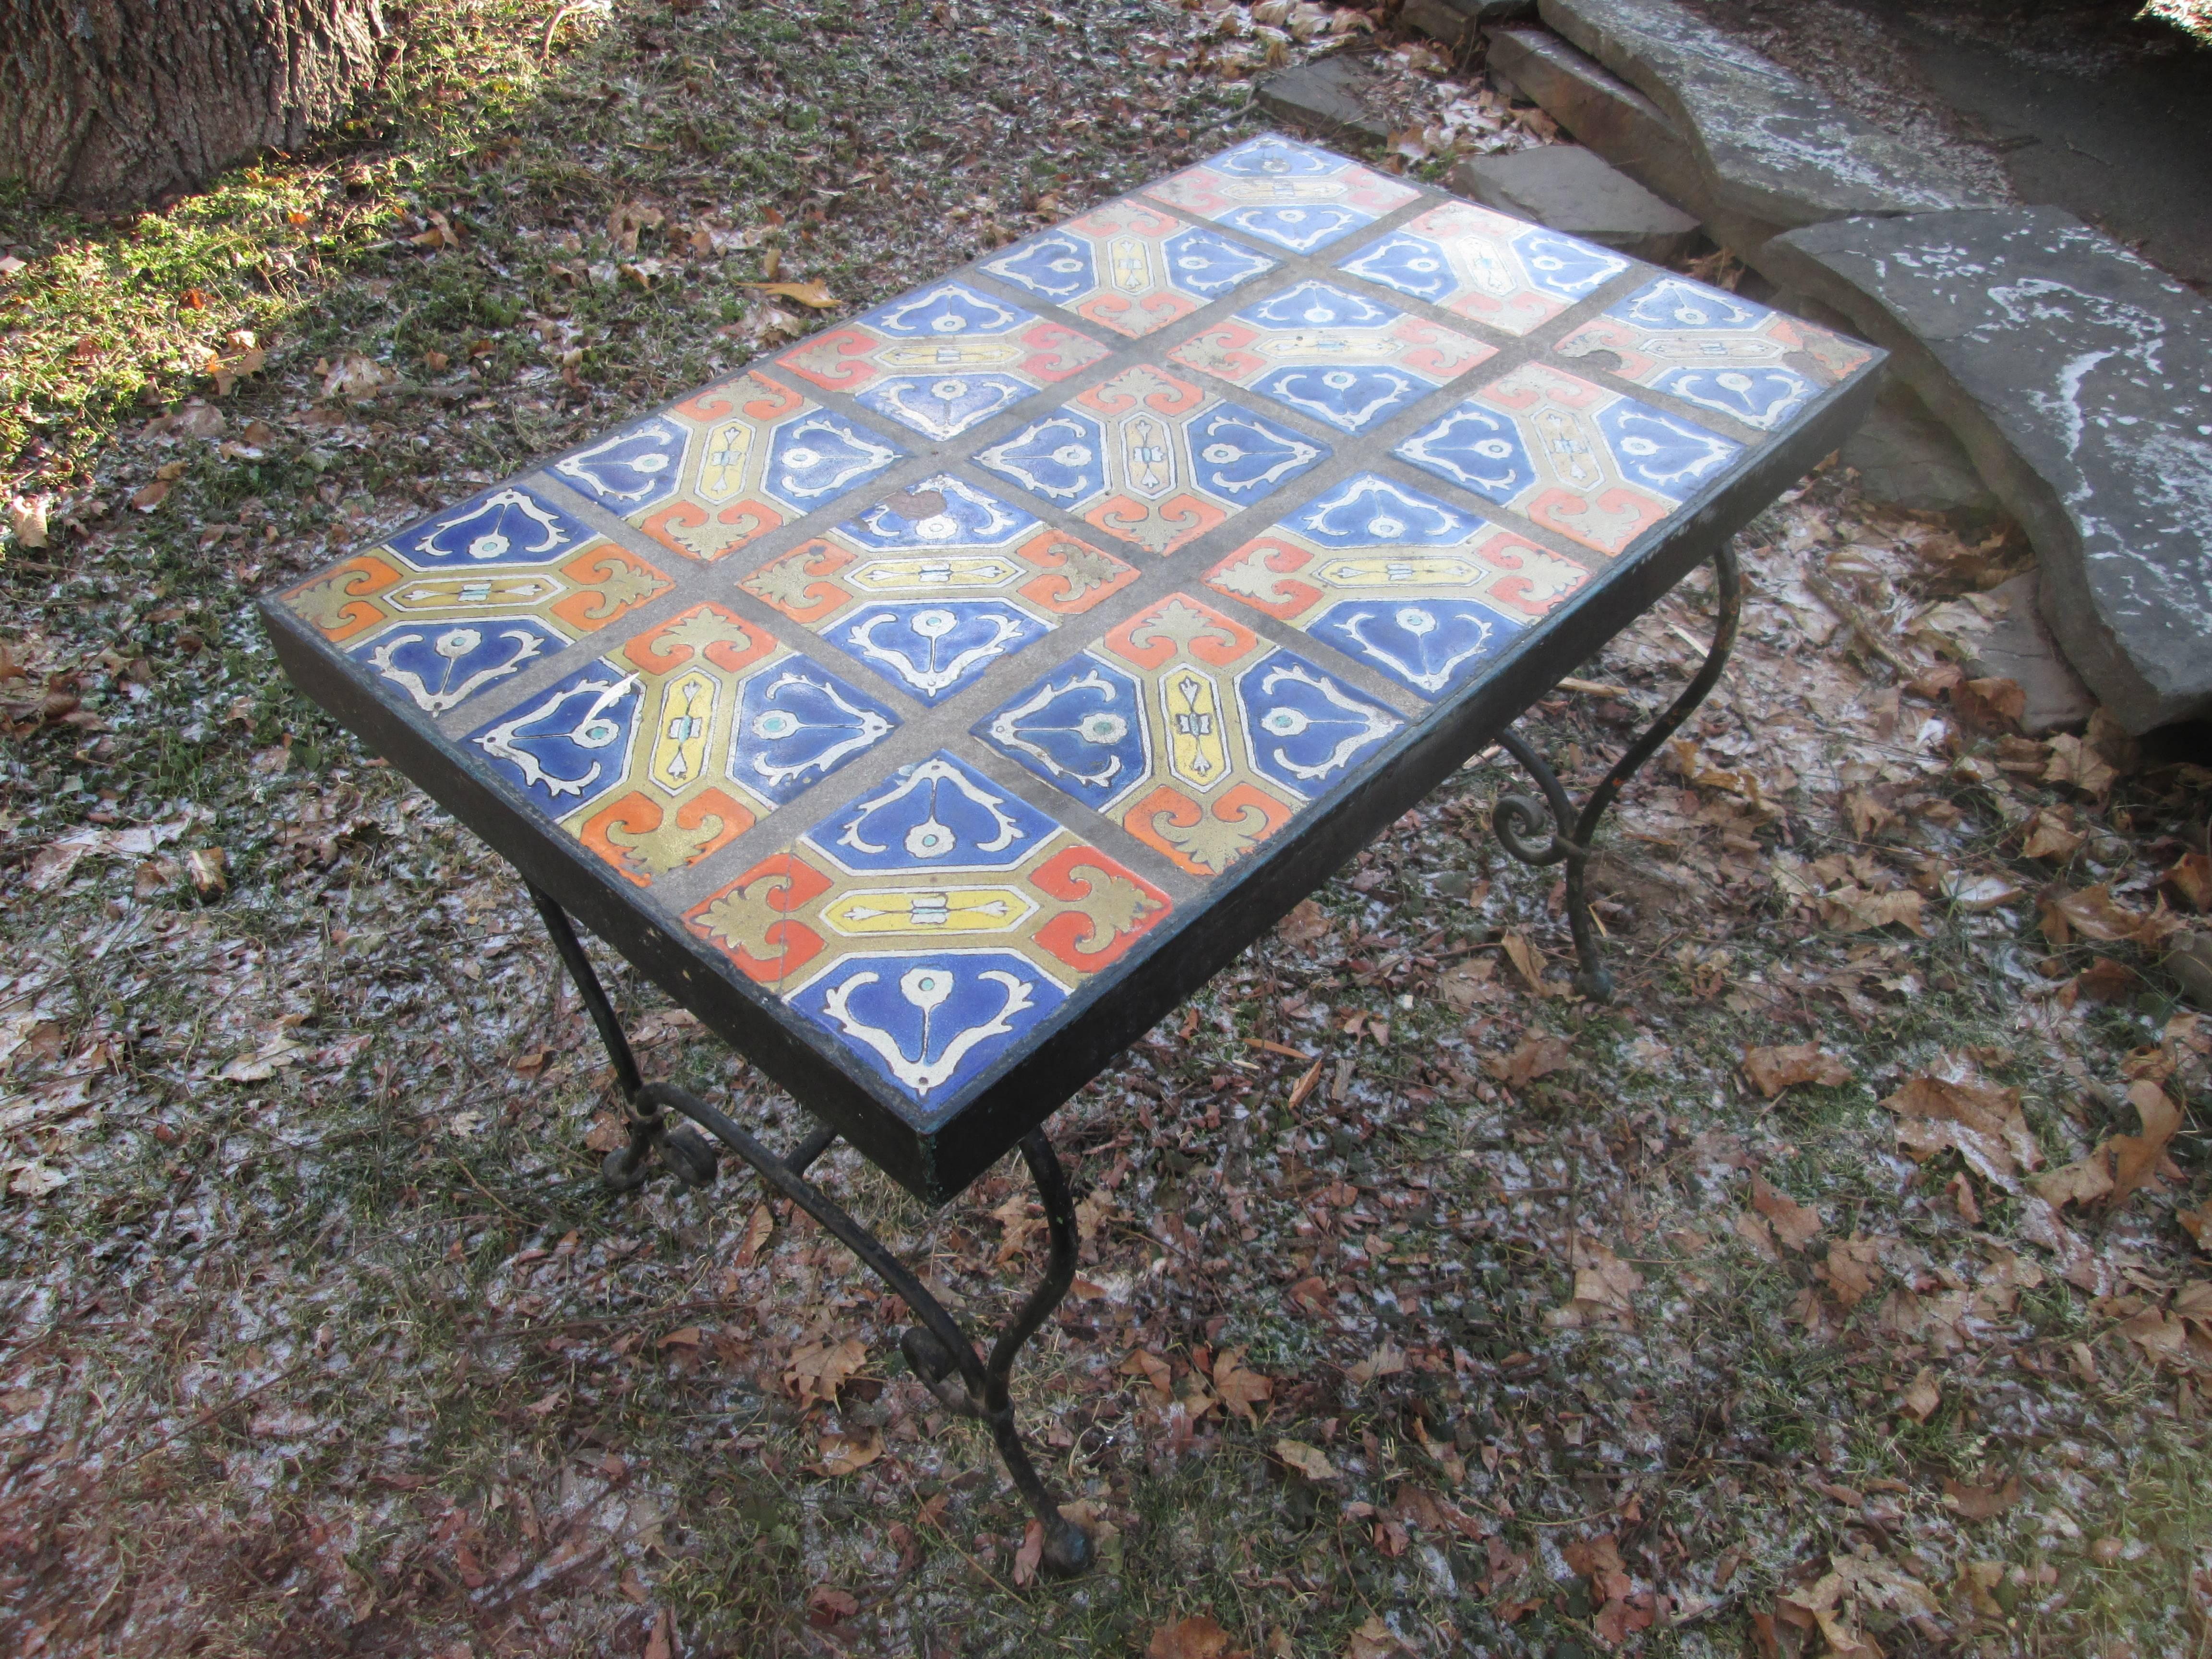 Handpainted ceramic tiles inset in cast iron base.  Extremely heavy. 